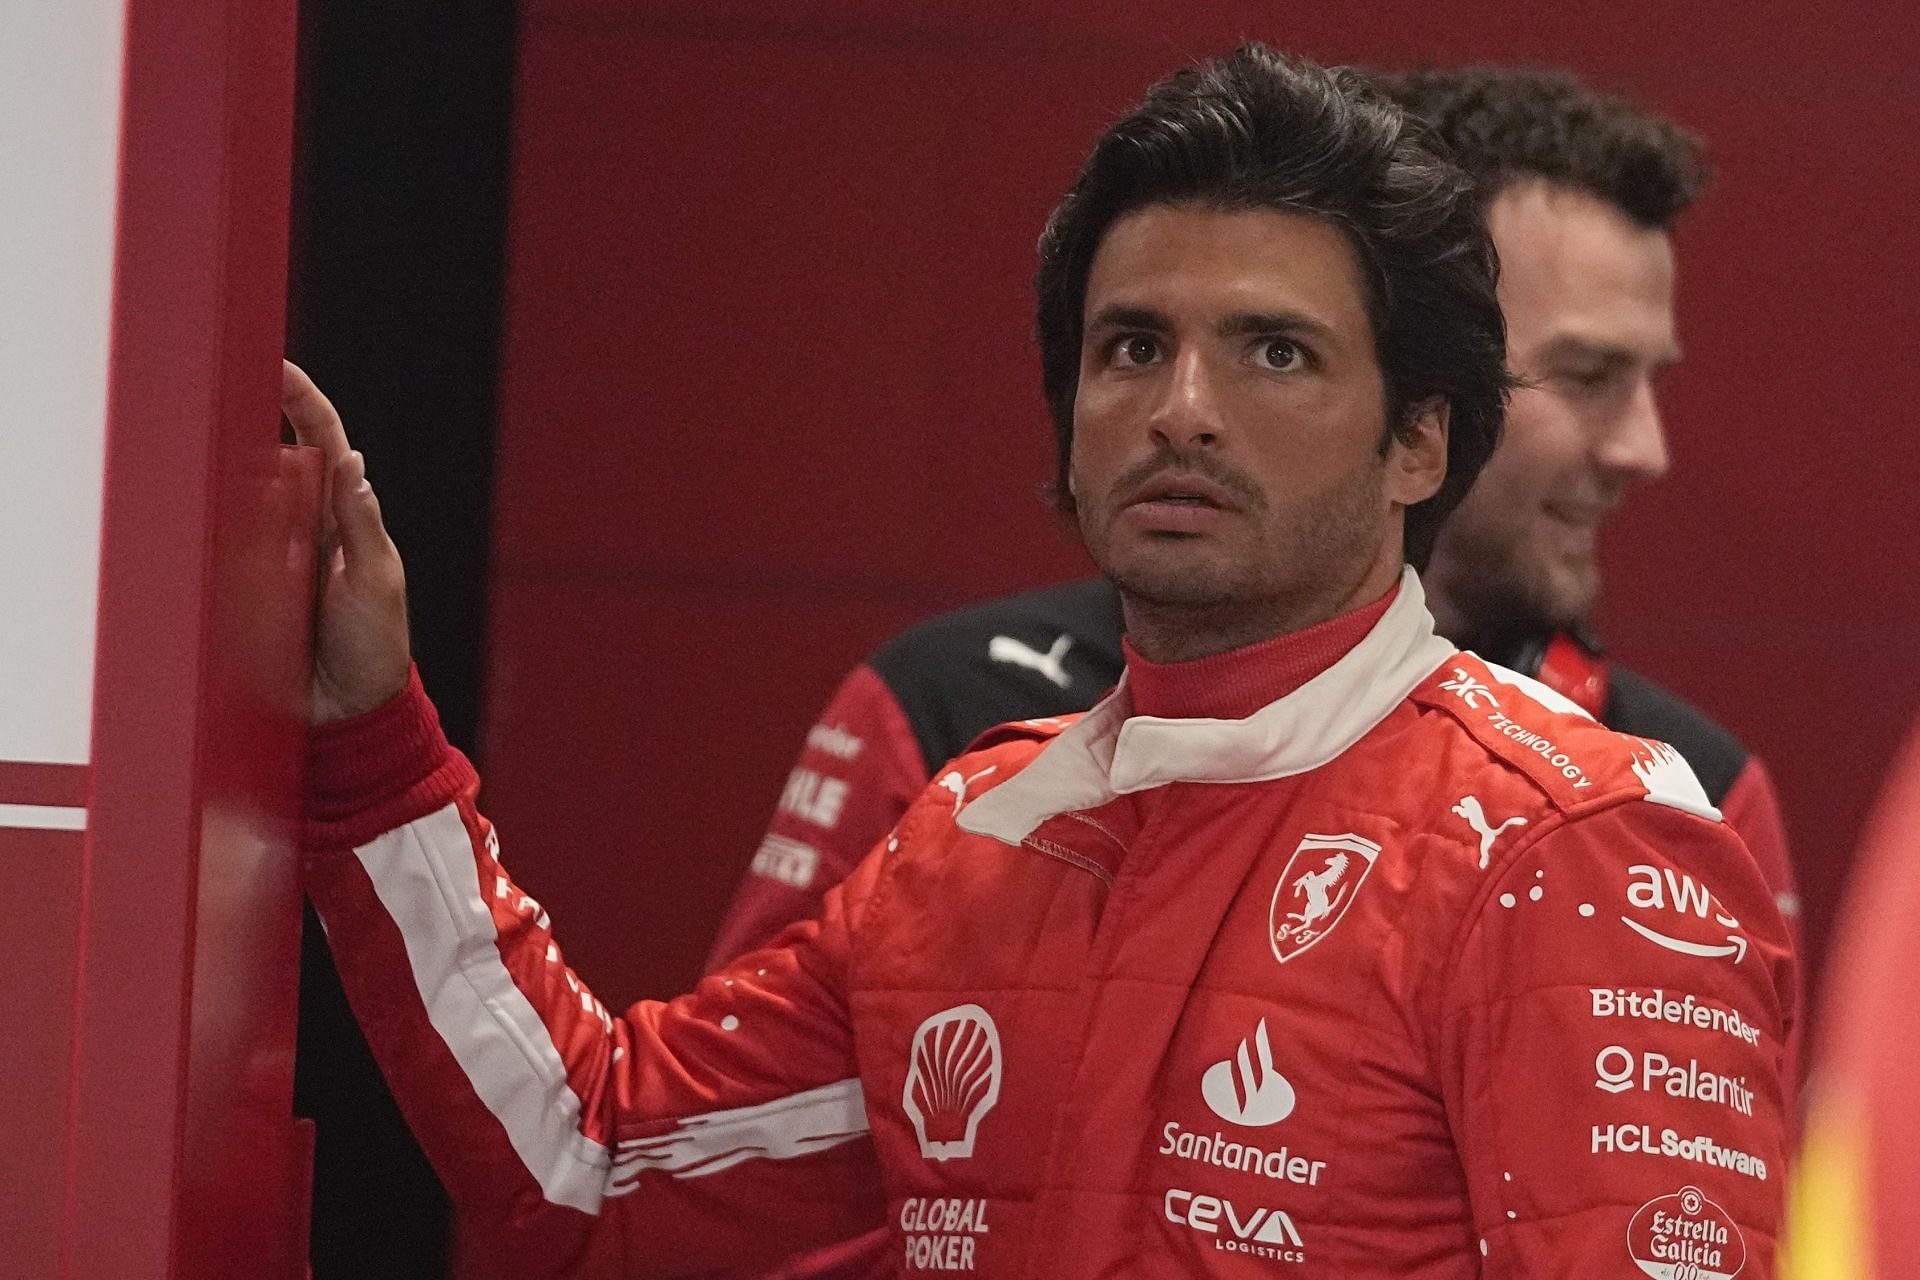 How Sainz's Smooth Operator running joke came about